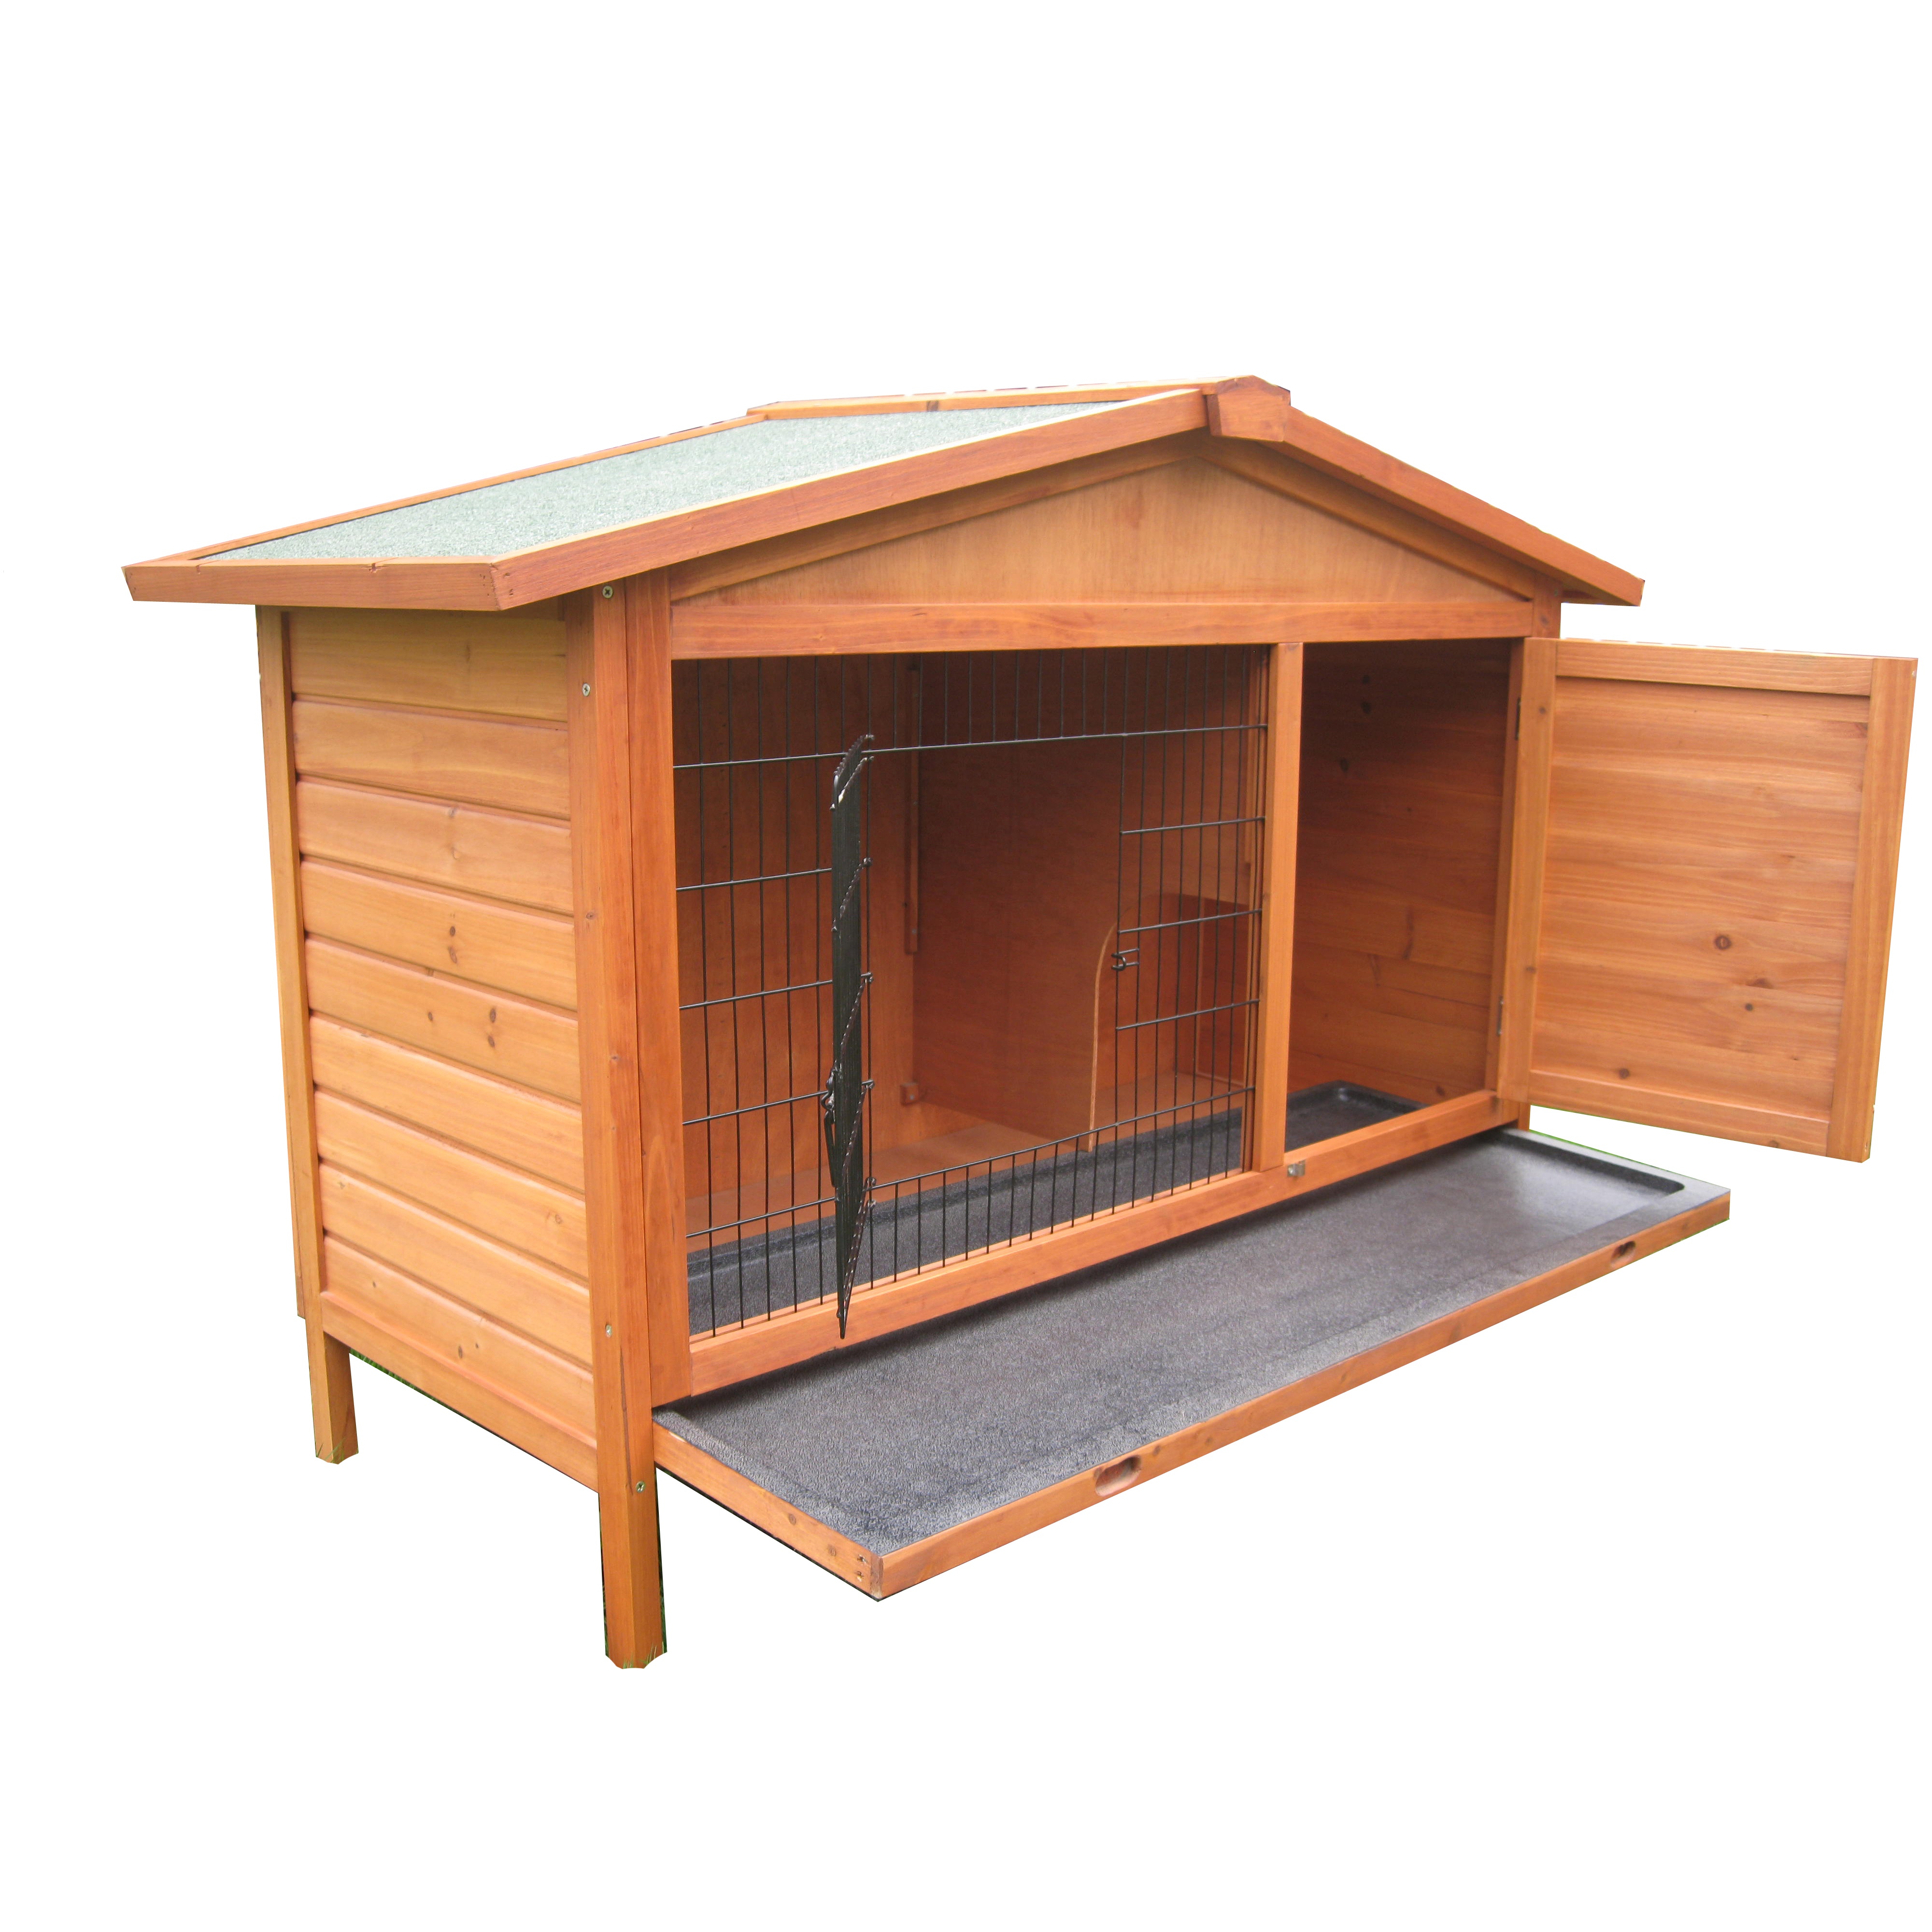 China New Product Extra Large Rabbit Hutch With Runs -
 Custom design OEM Guinea Pig Small Animal Cage Unique Water-Resistant Used Rabbit Cages Bunny hutch For Sale – Easy